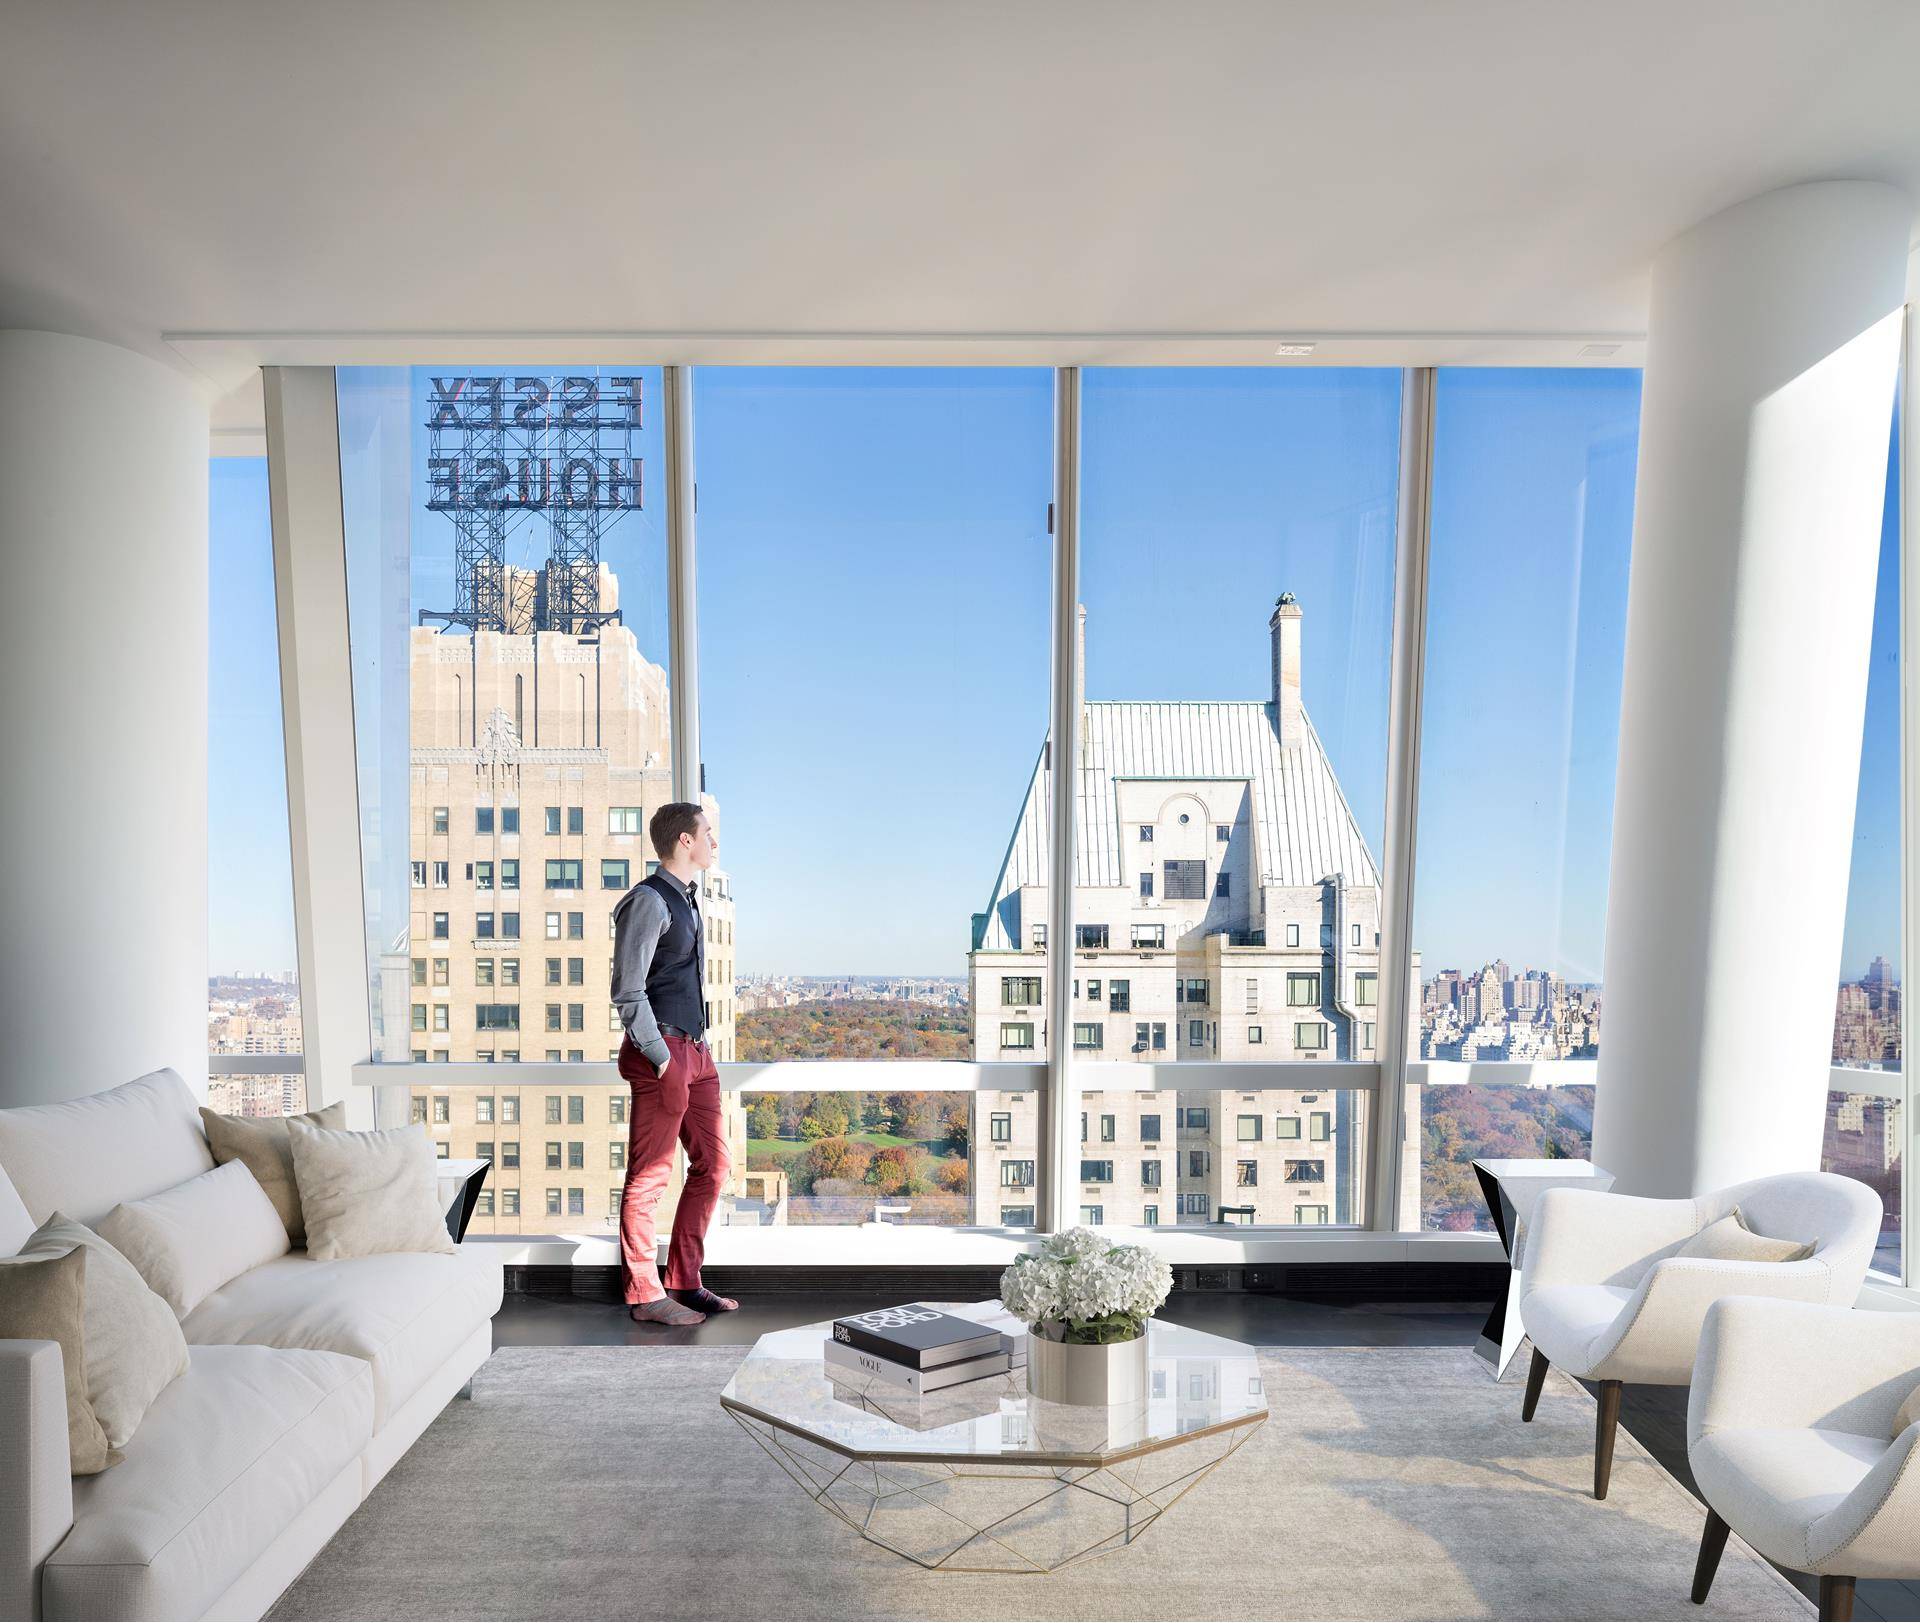 Designed by Pritzker Prize winning architect Christian de Portzamparc with interiors by renowned Danish architect Thomas Juul Hansen, One57 graces the center of the famed Manhattan skyline.